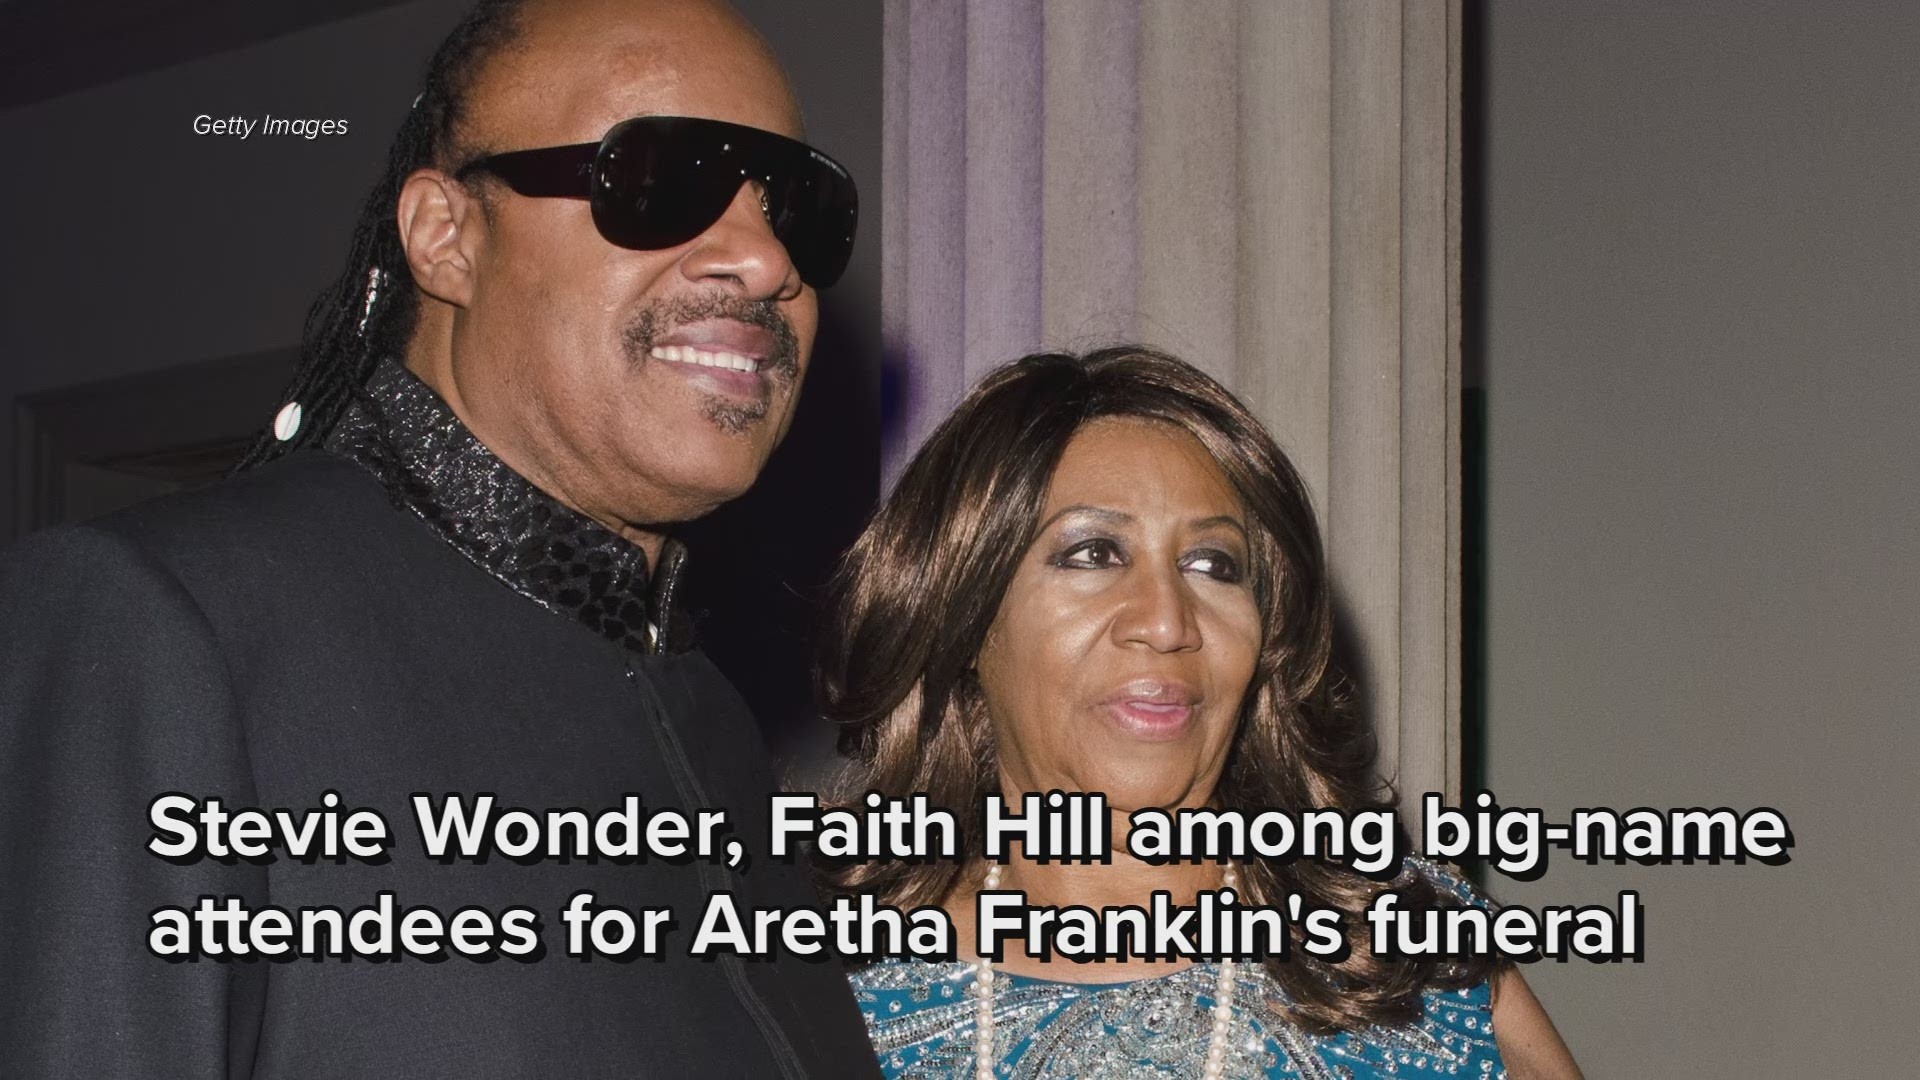 Stevie Wonder, Faith Hill among big-name attendees for Aretha Franklin's funeral